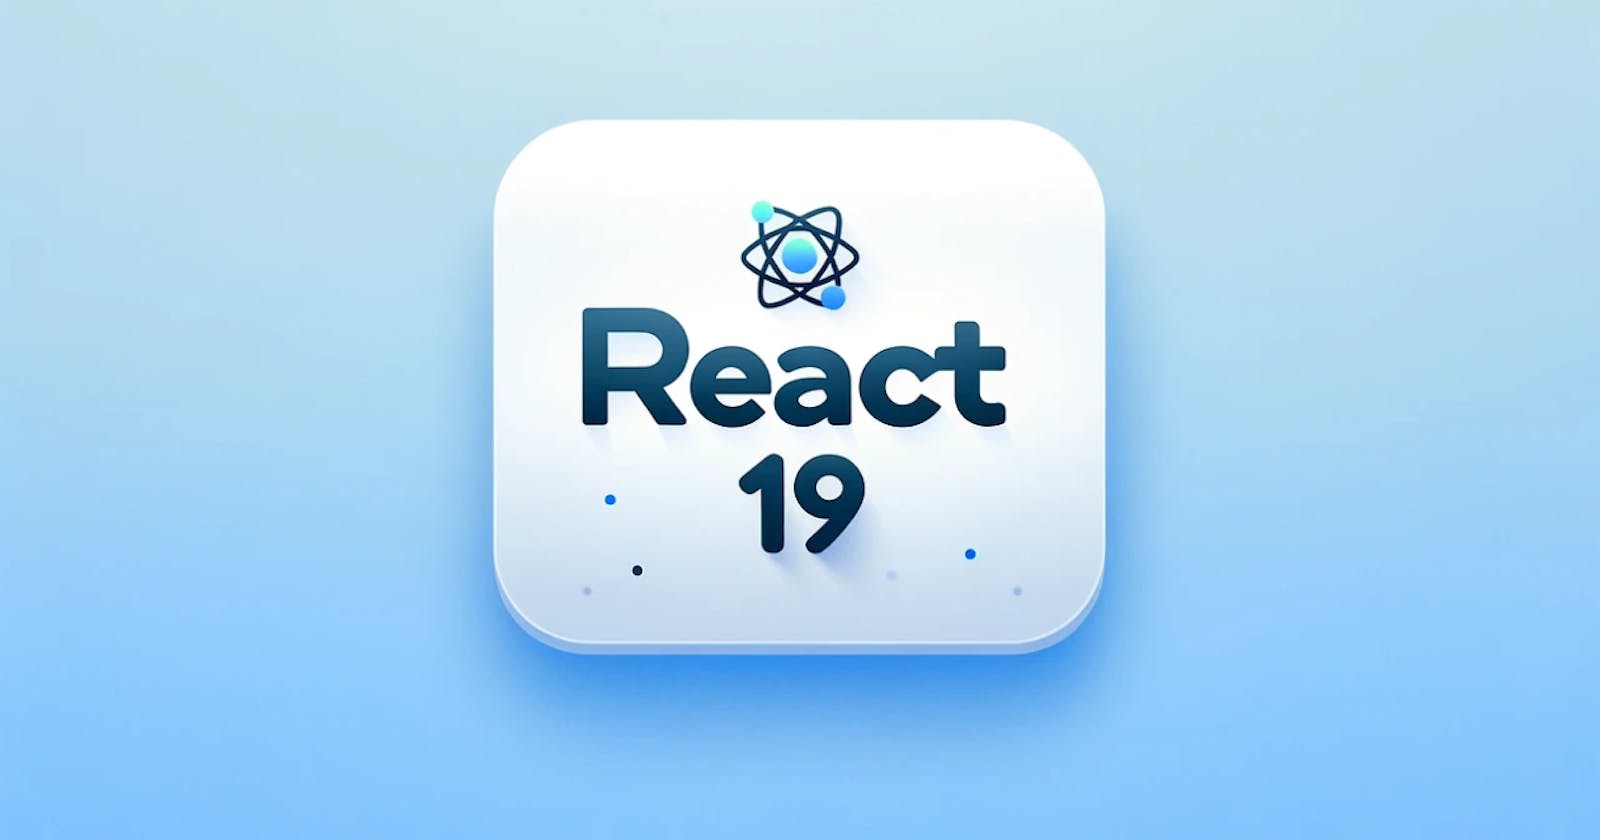 Everything You Need to Know about React 19